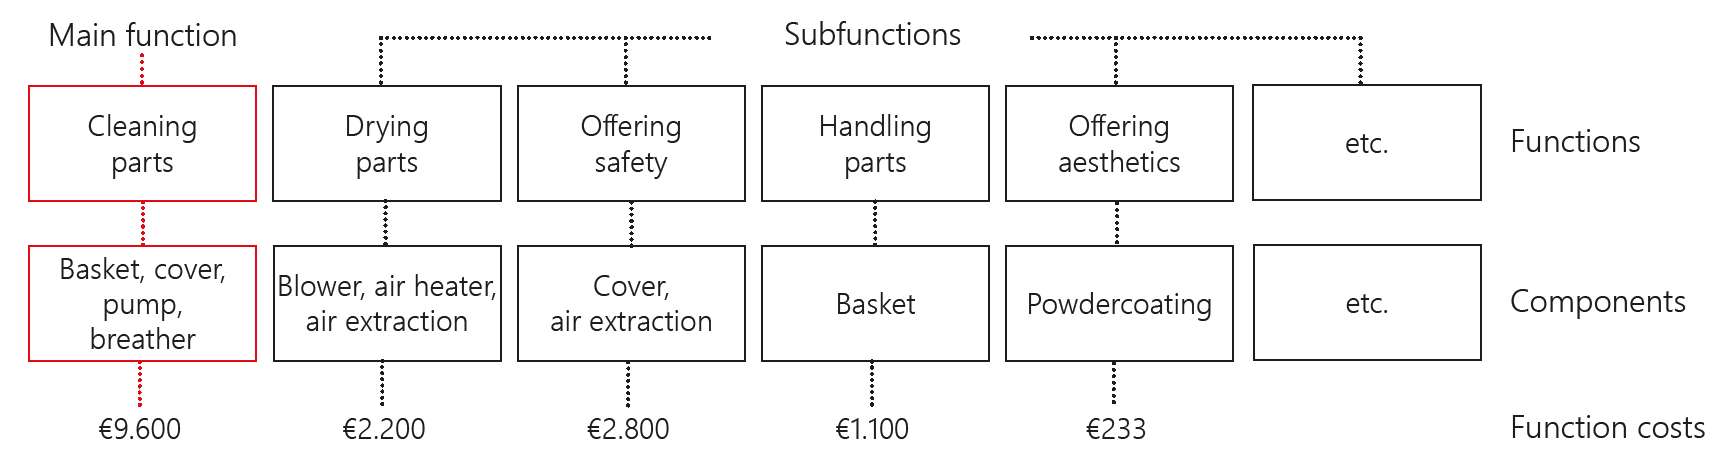 function costs, value engineering